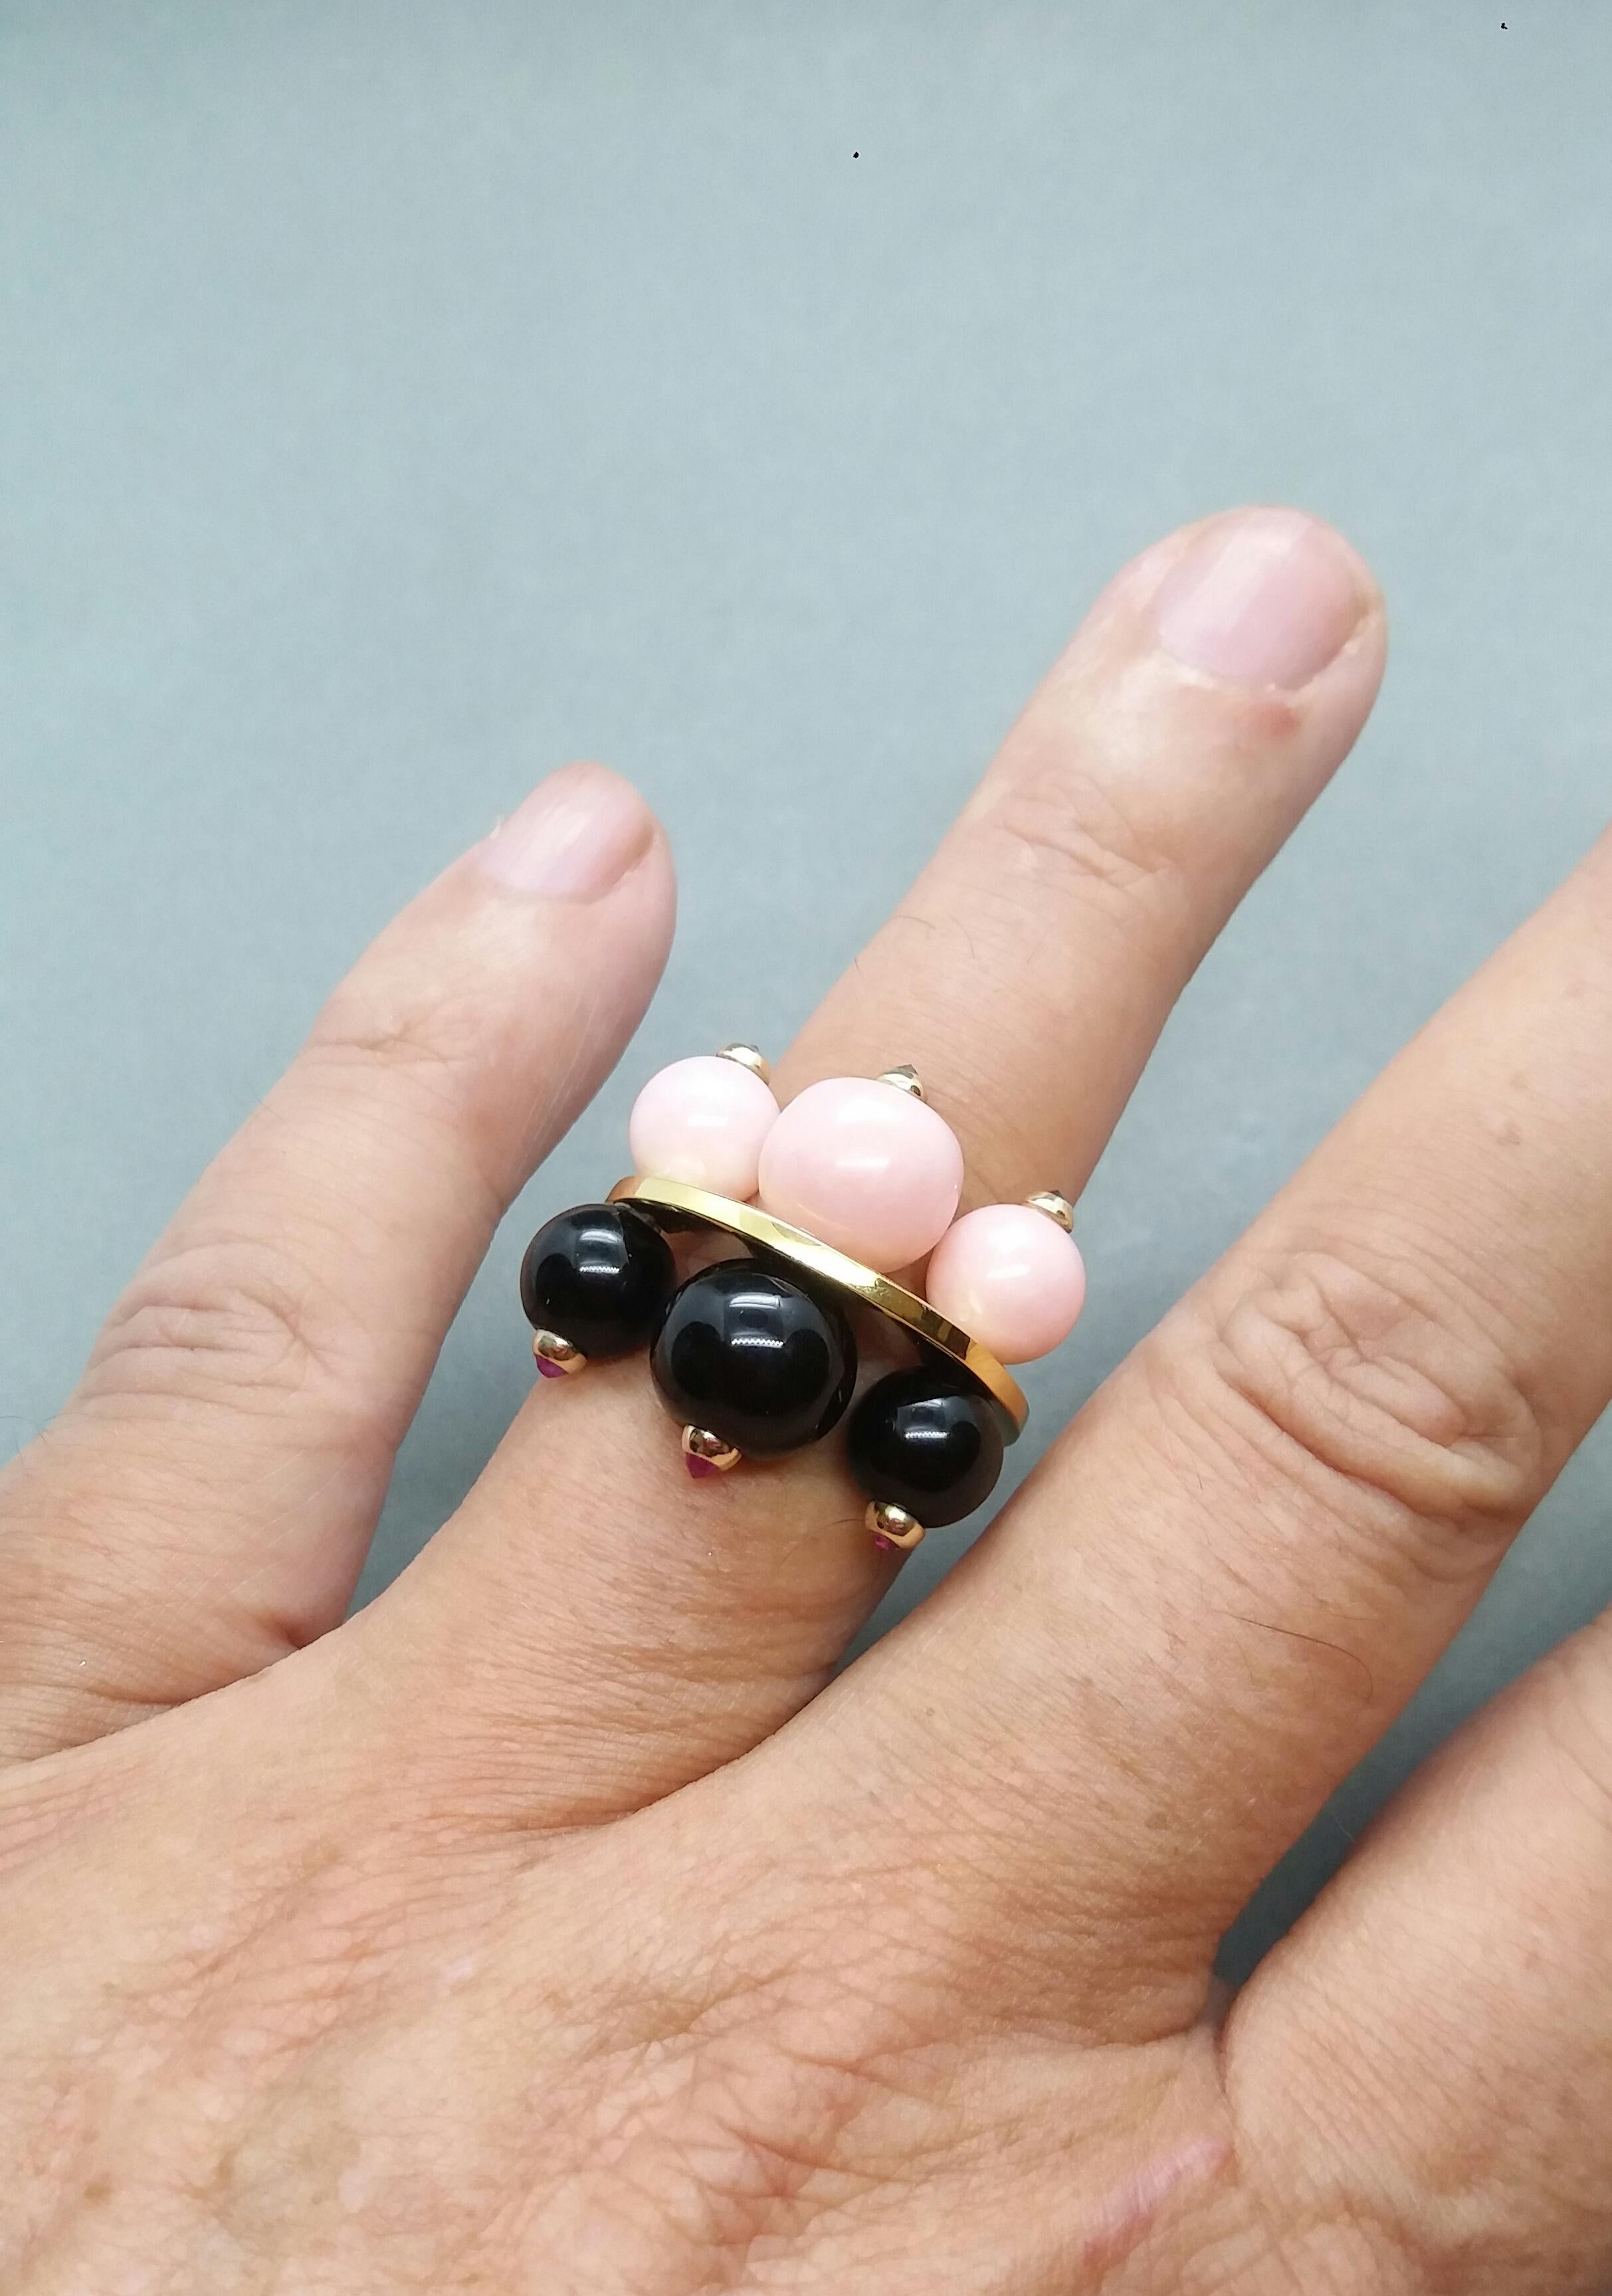 14 Karat Gold Black Onyx and Pink Opal Round Beads Rubies Black Diamonds Ring For Sale 5